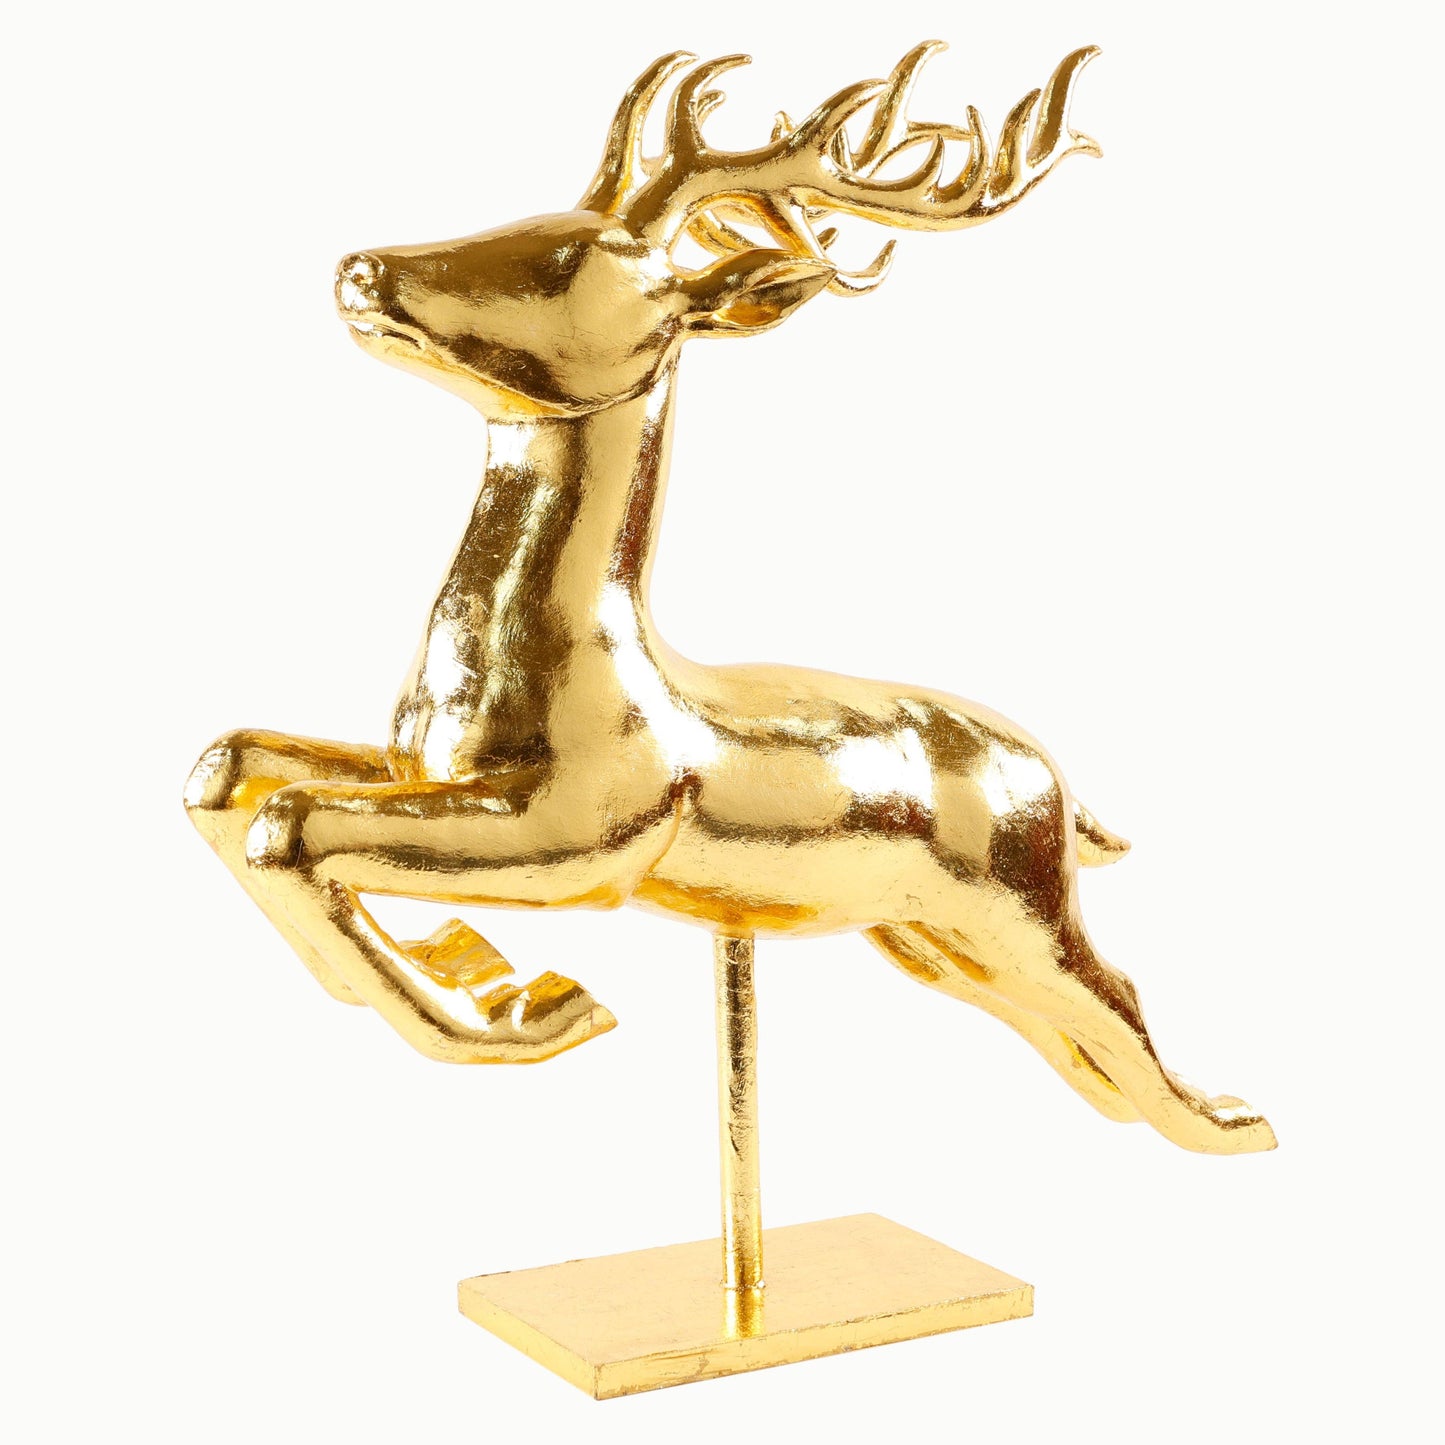 24" LEAPING DEER GOLD W/ WOOD BASE